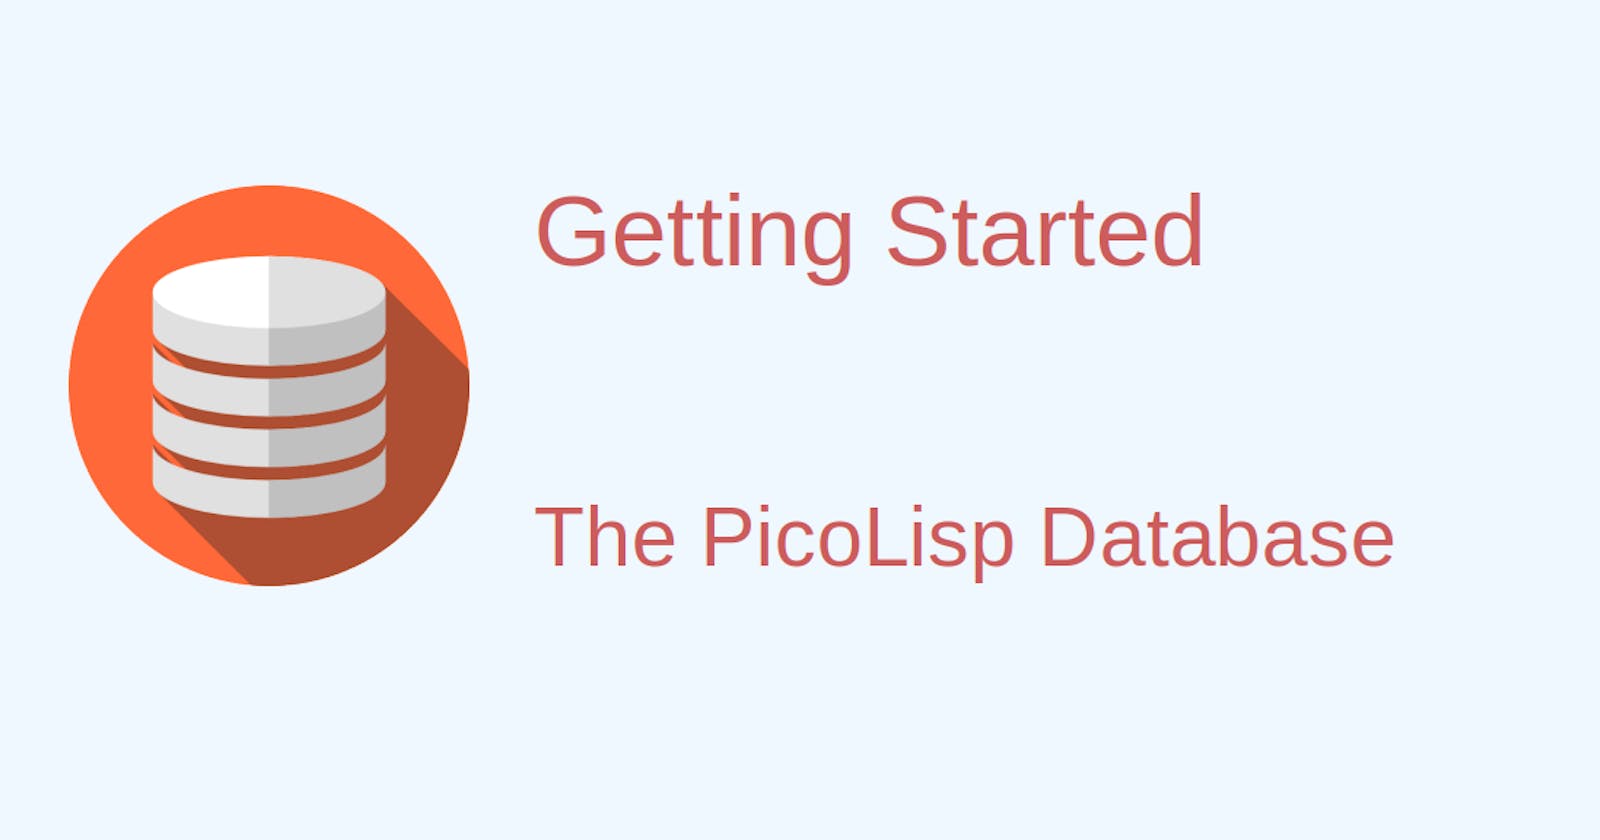 Getting started with the PicoLisp database